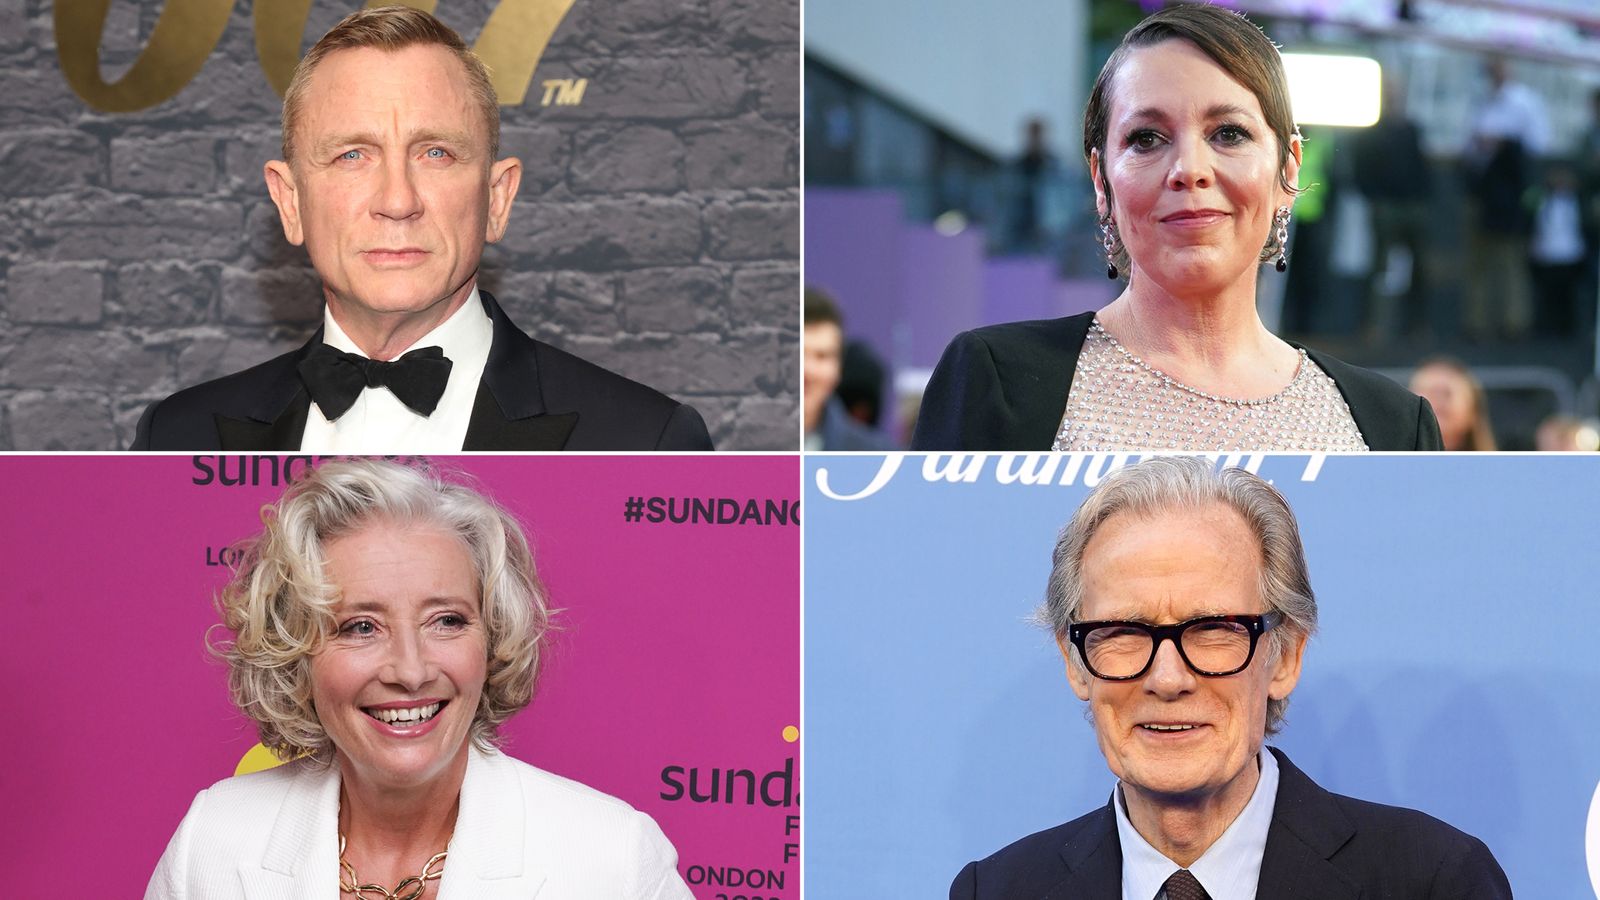 Golden Globes: British stars rake in nominations, ahead of controversial award ceremony's TV return